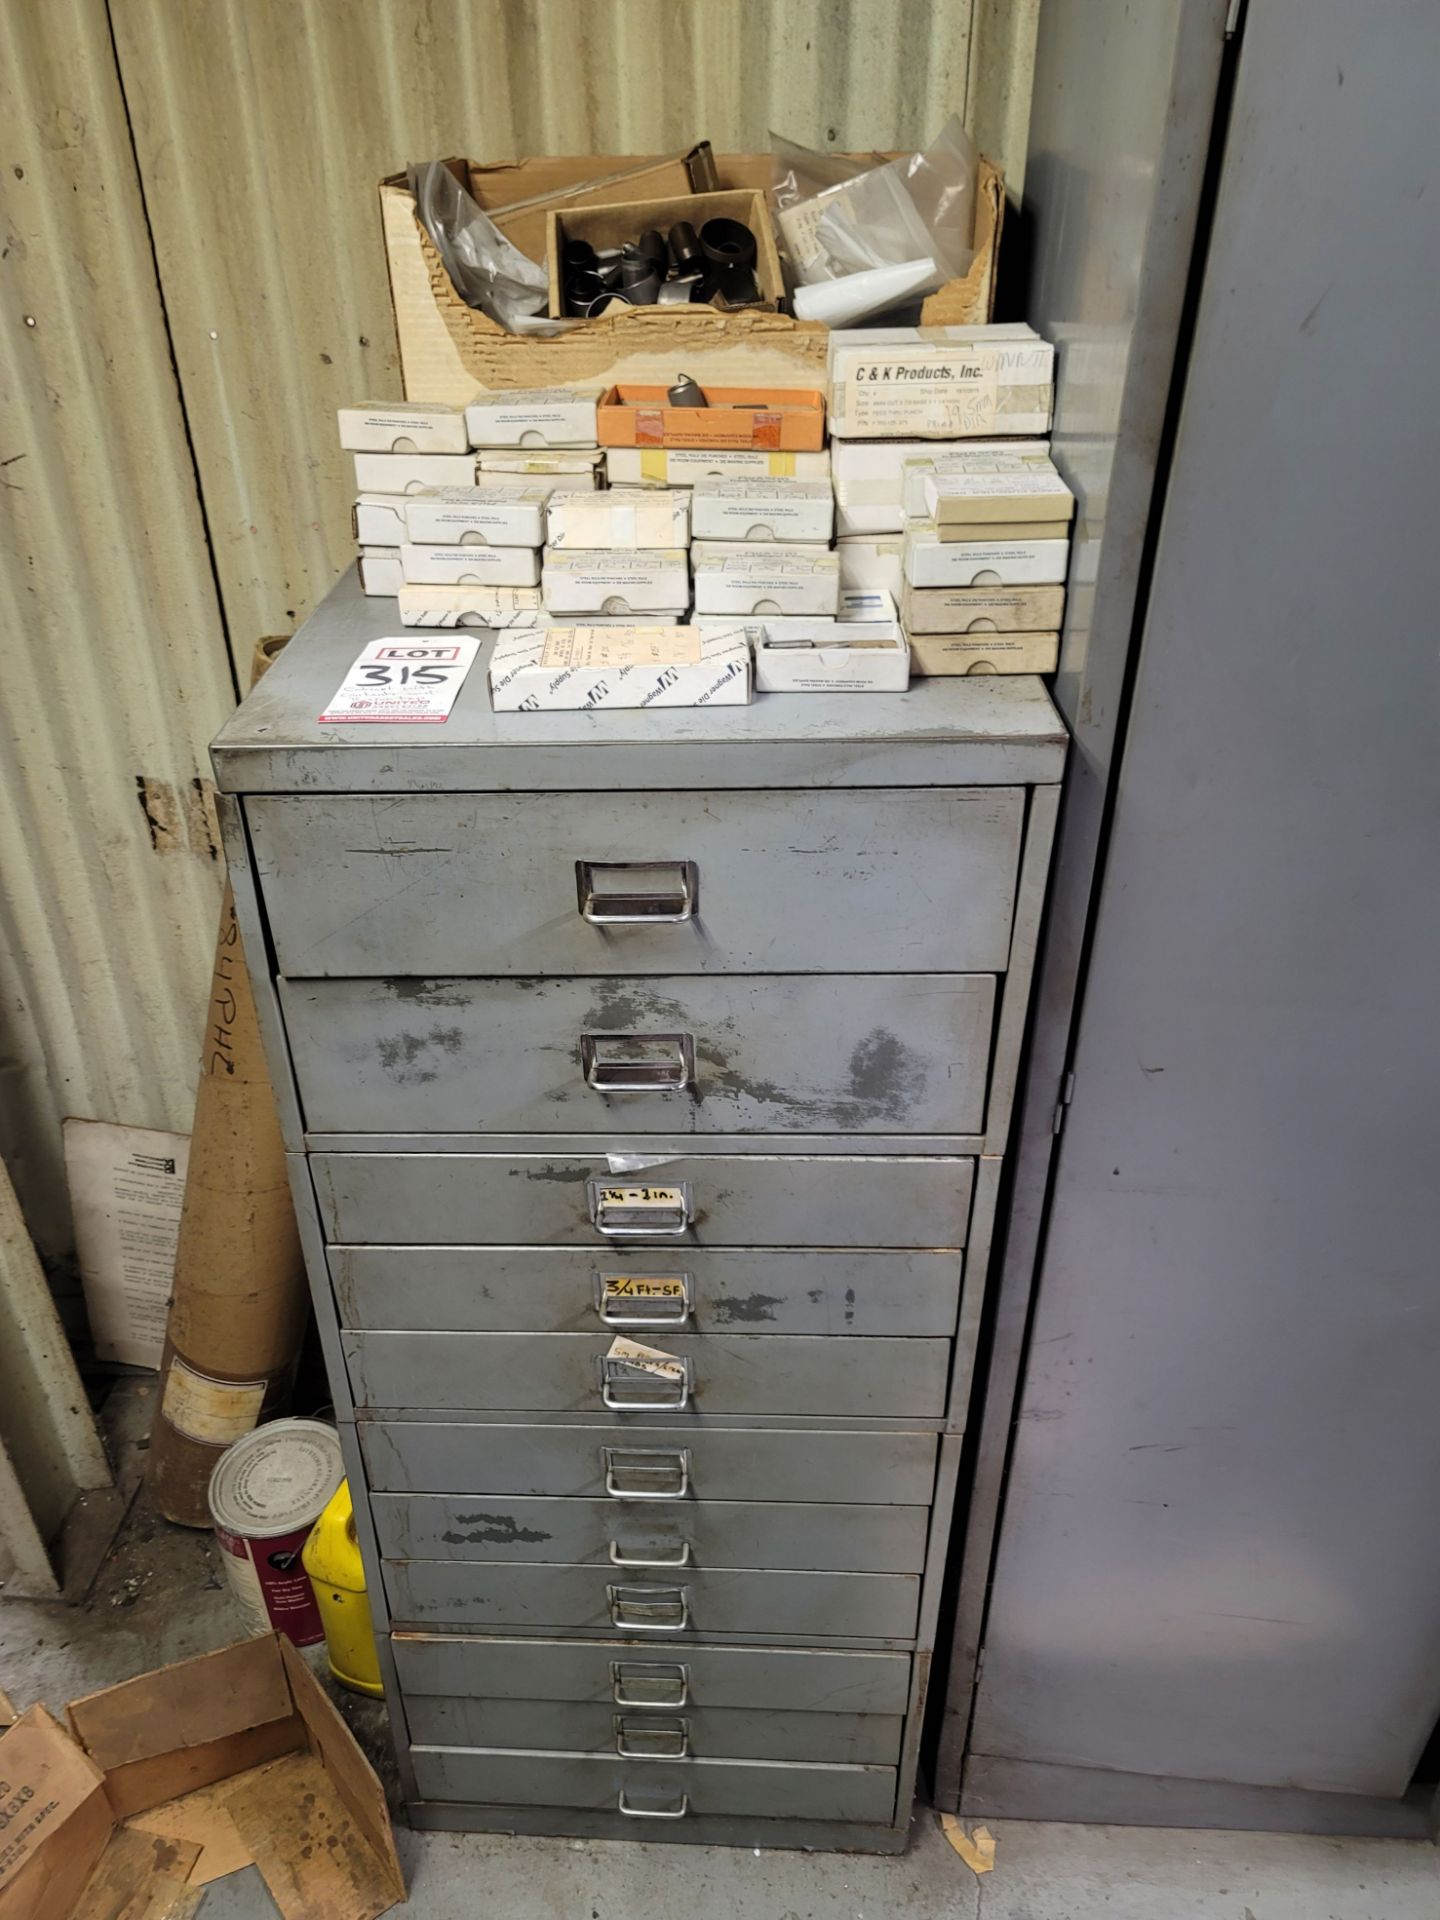 LOT - CABINET, W/ CONTENTS AND ITEMS ON TOP, FEED THRU PUNCHES